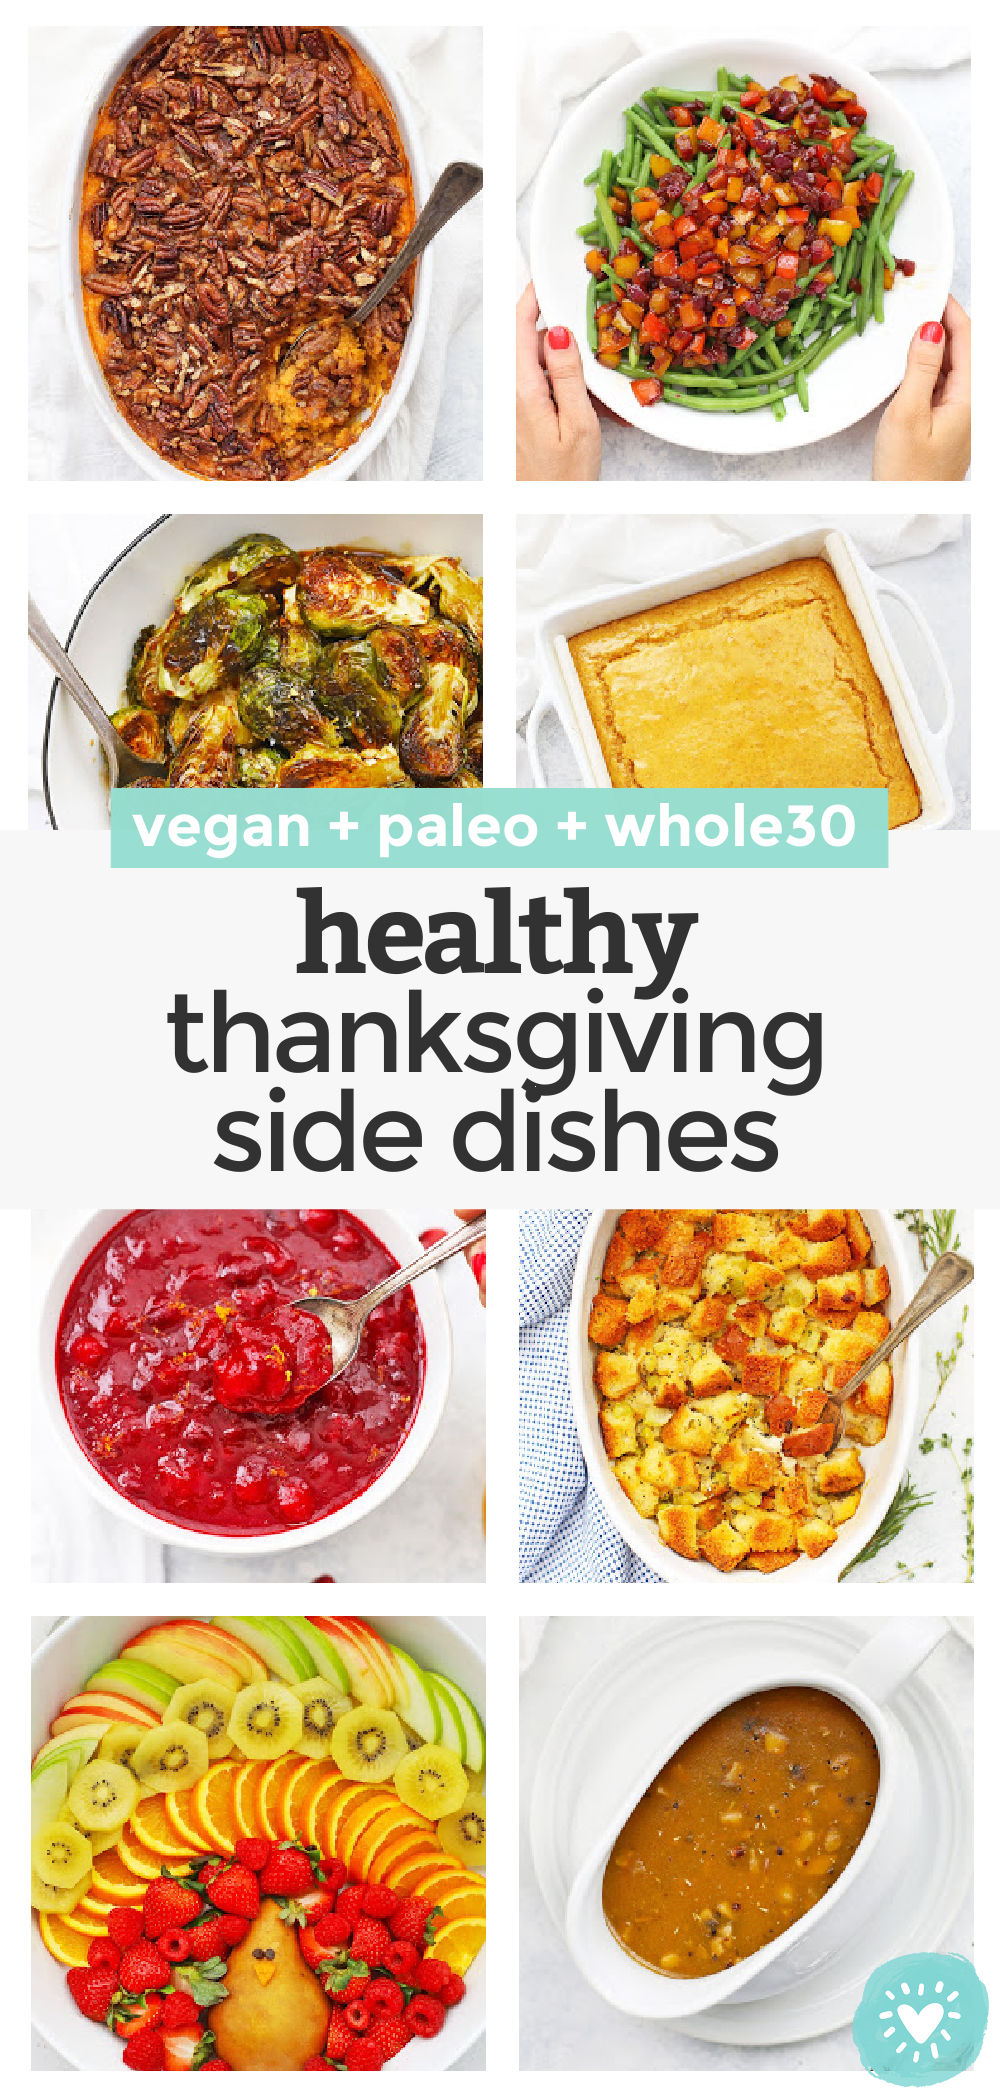 Our Best Healthy Thanksgiving Side Dishes - Everything you need for Thanksgiving besides a turkey! It's always a good Thanksgiving with these yummy sides! // Paleo Thanksgiving Sides // Vegan Thanksgiving Sides // Gluten Free Thanksgiving Side Dishes // Healthy Thanksgiving Sides #sidedishes #thanksgiving #paleo #vegan #healthy #glutenfree